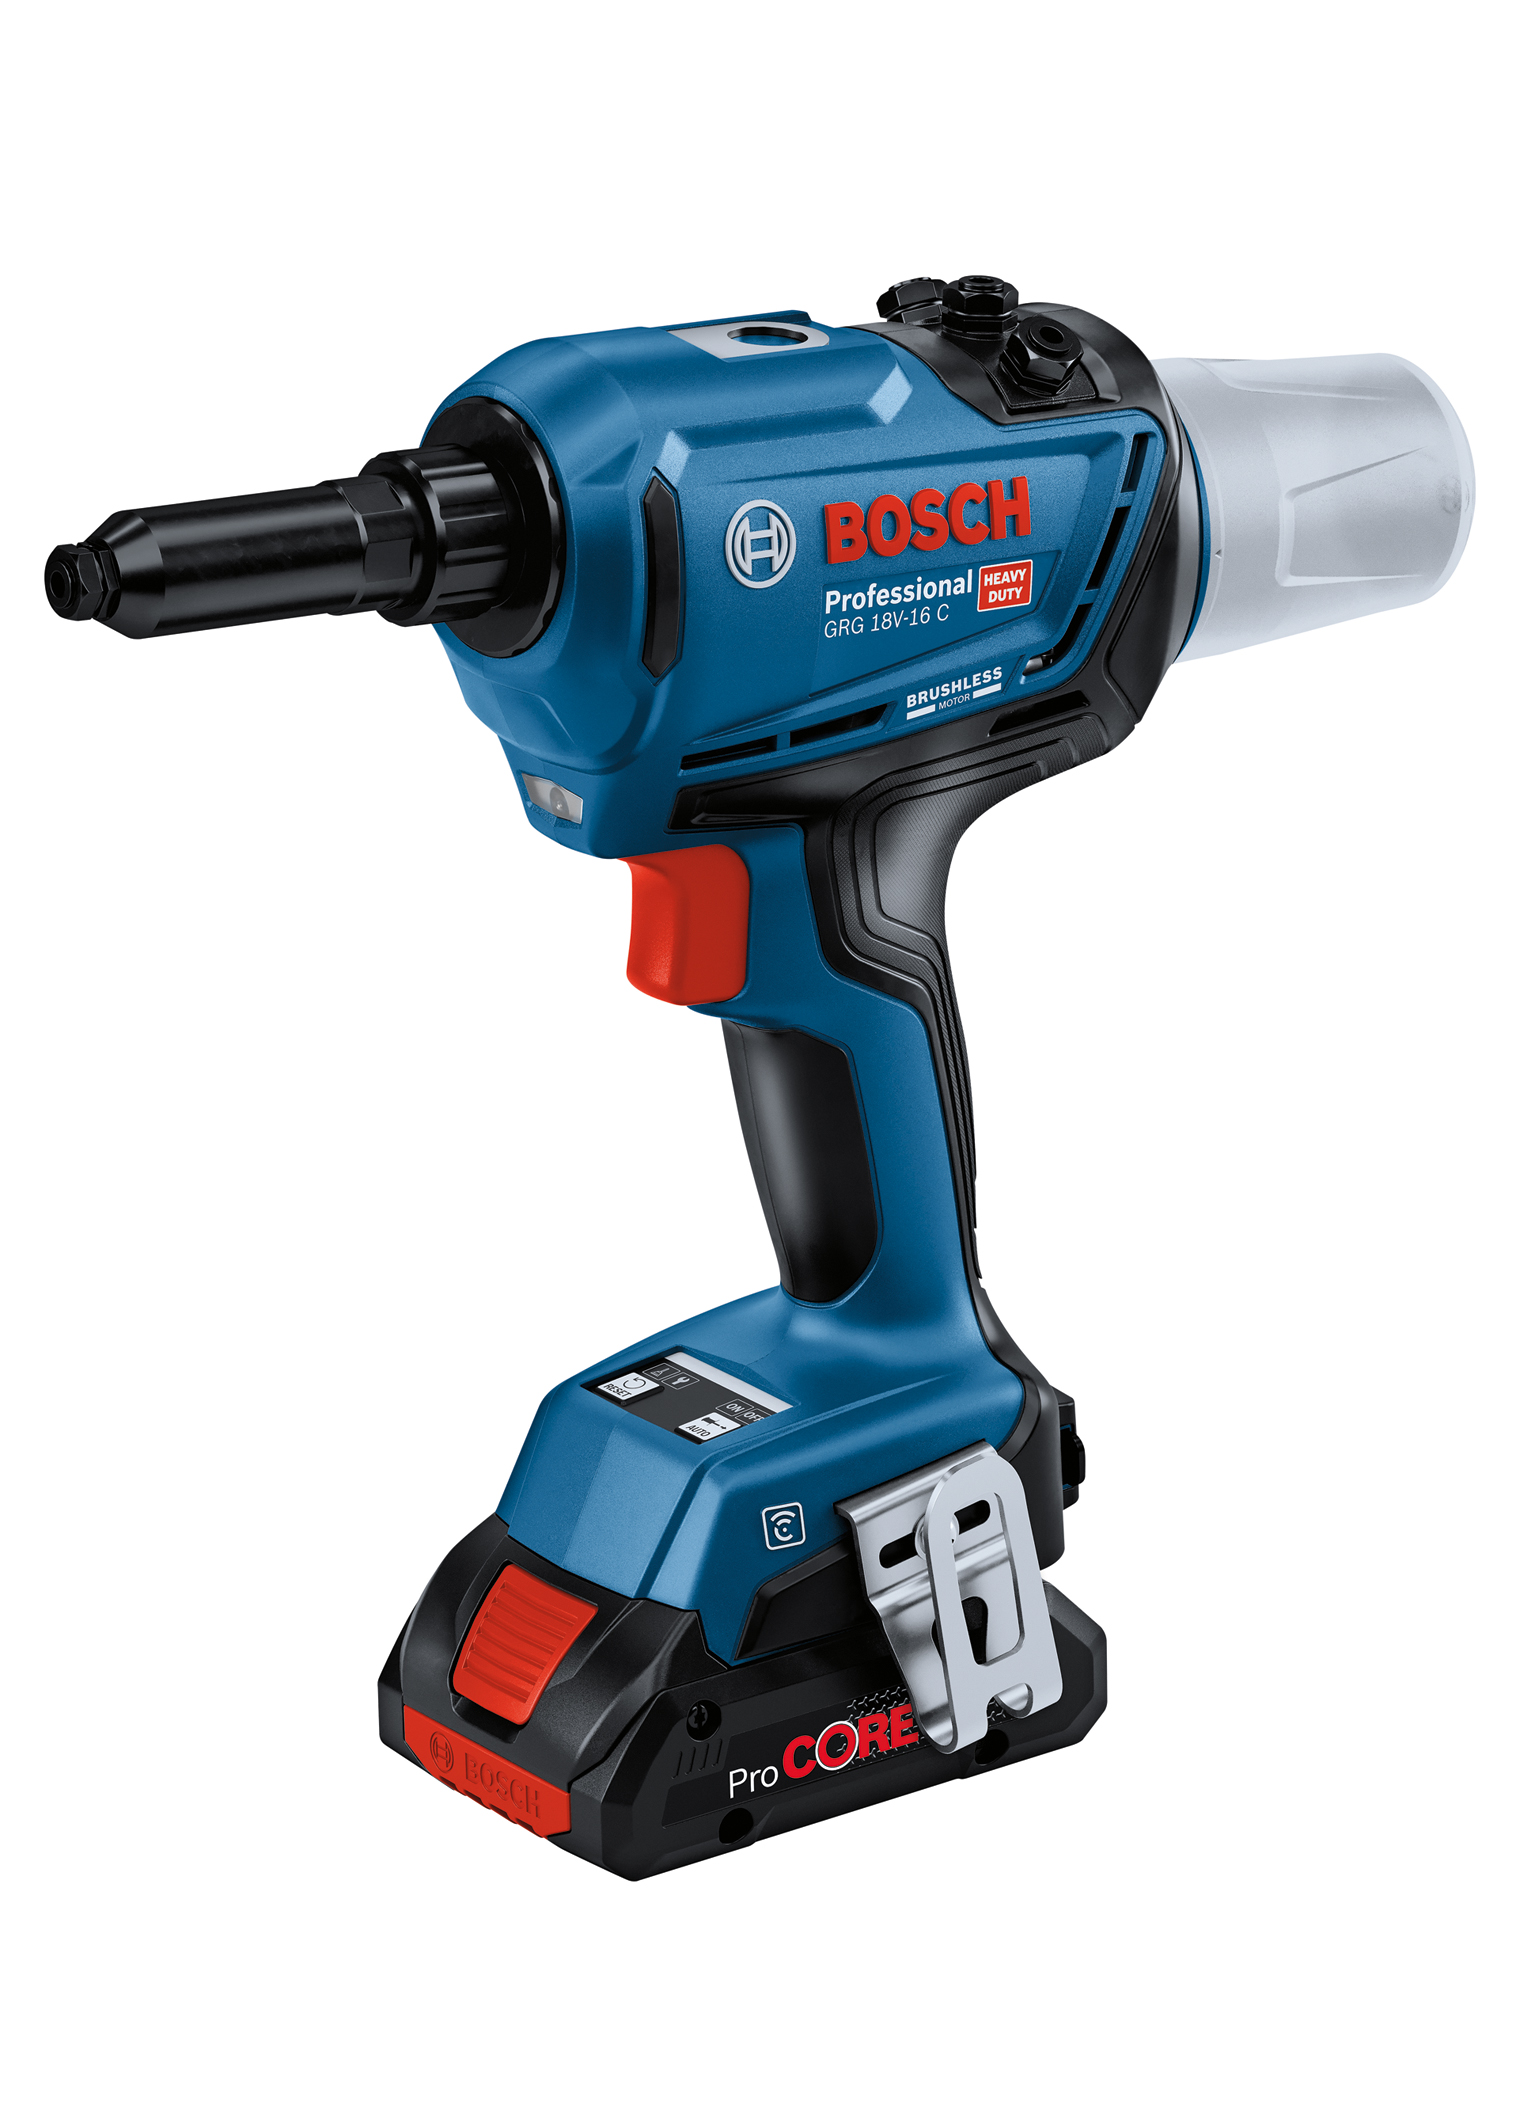 Strong expansion in the 'Professional 18V System': First cordless